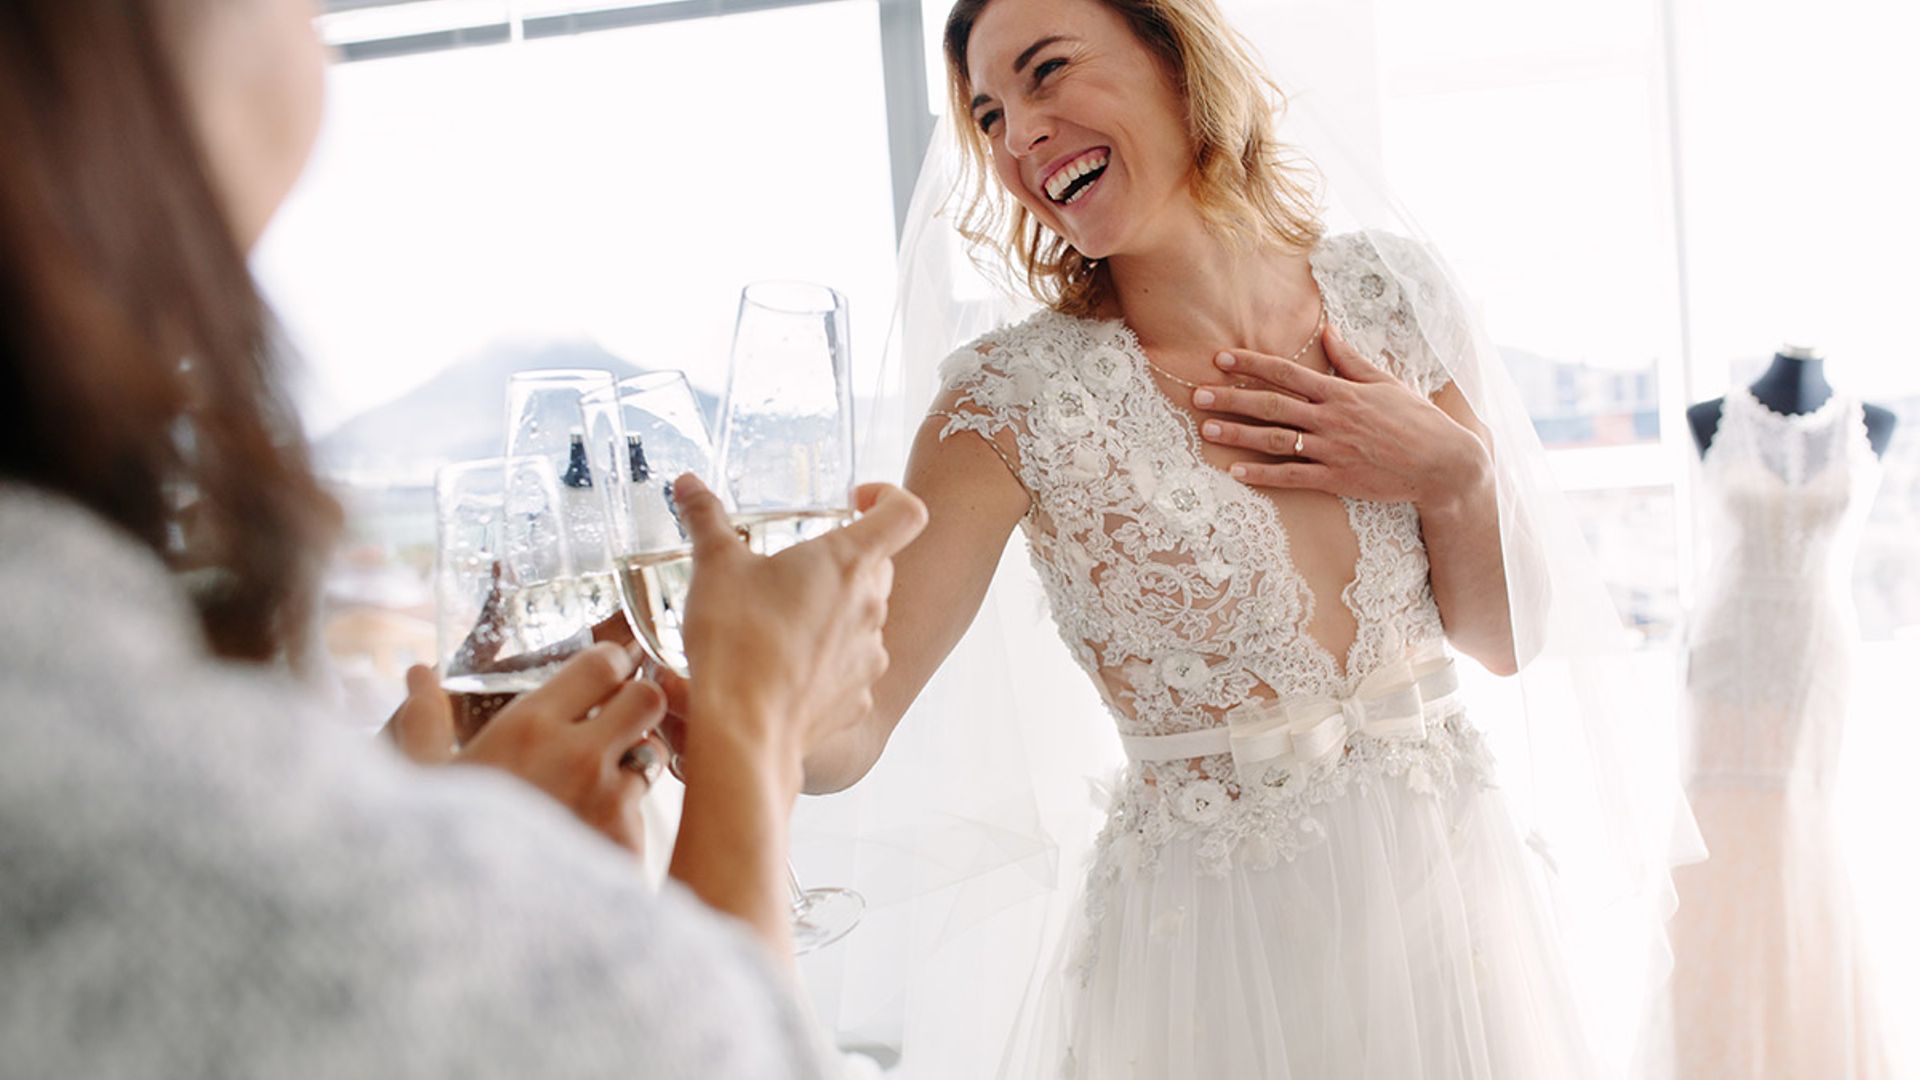 Kate Halfpenny reveals how to find your perfect wedding dress and the trends to look out for